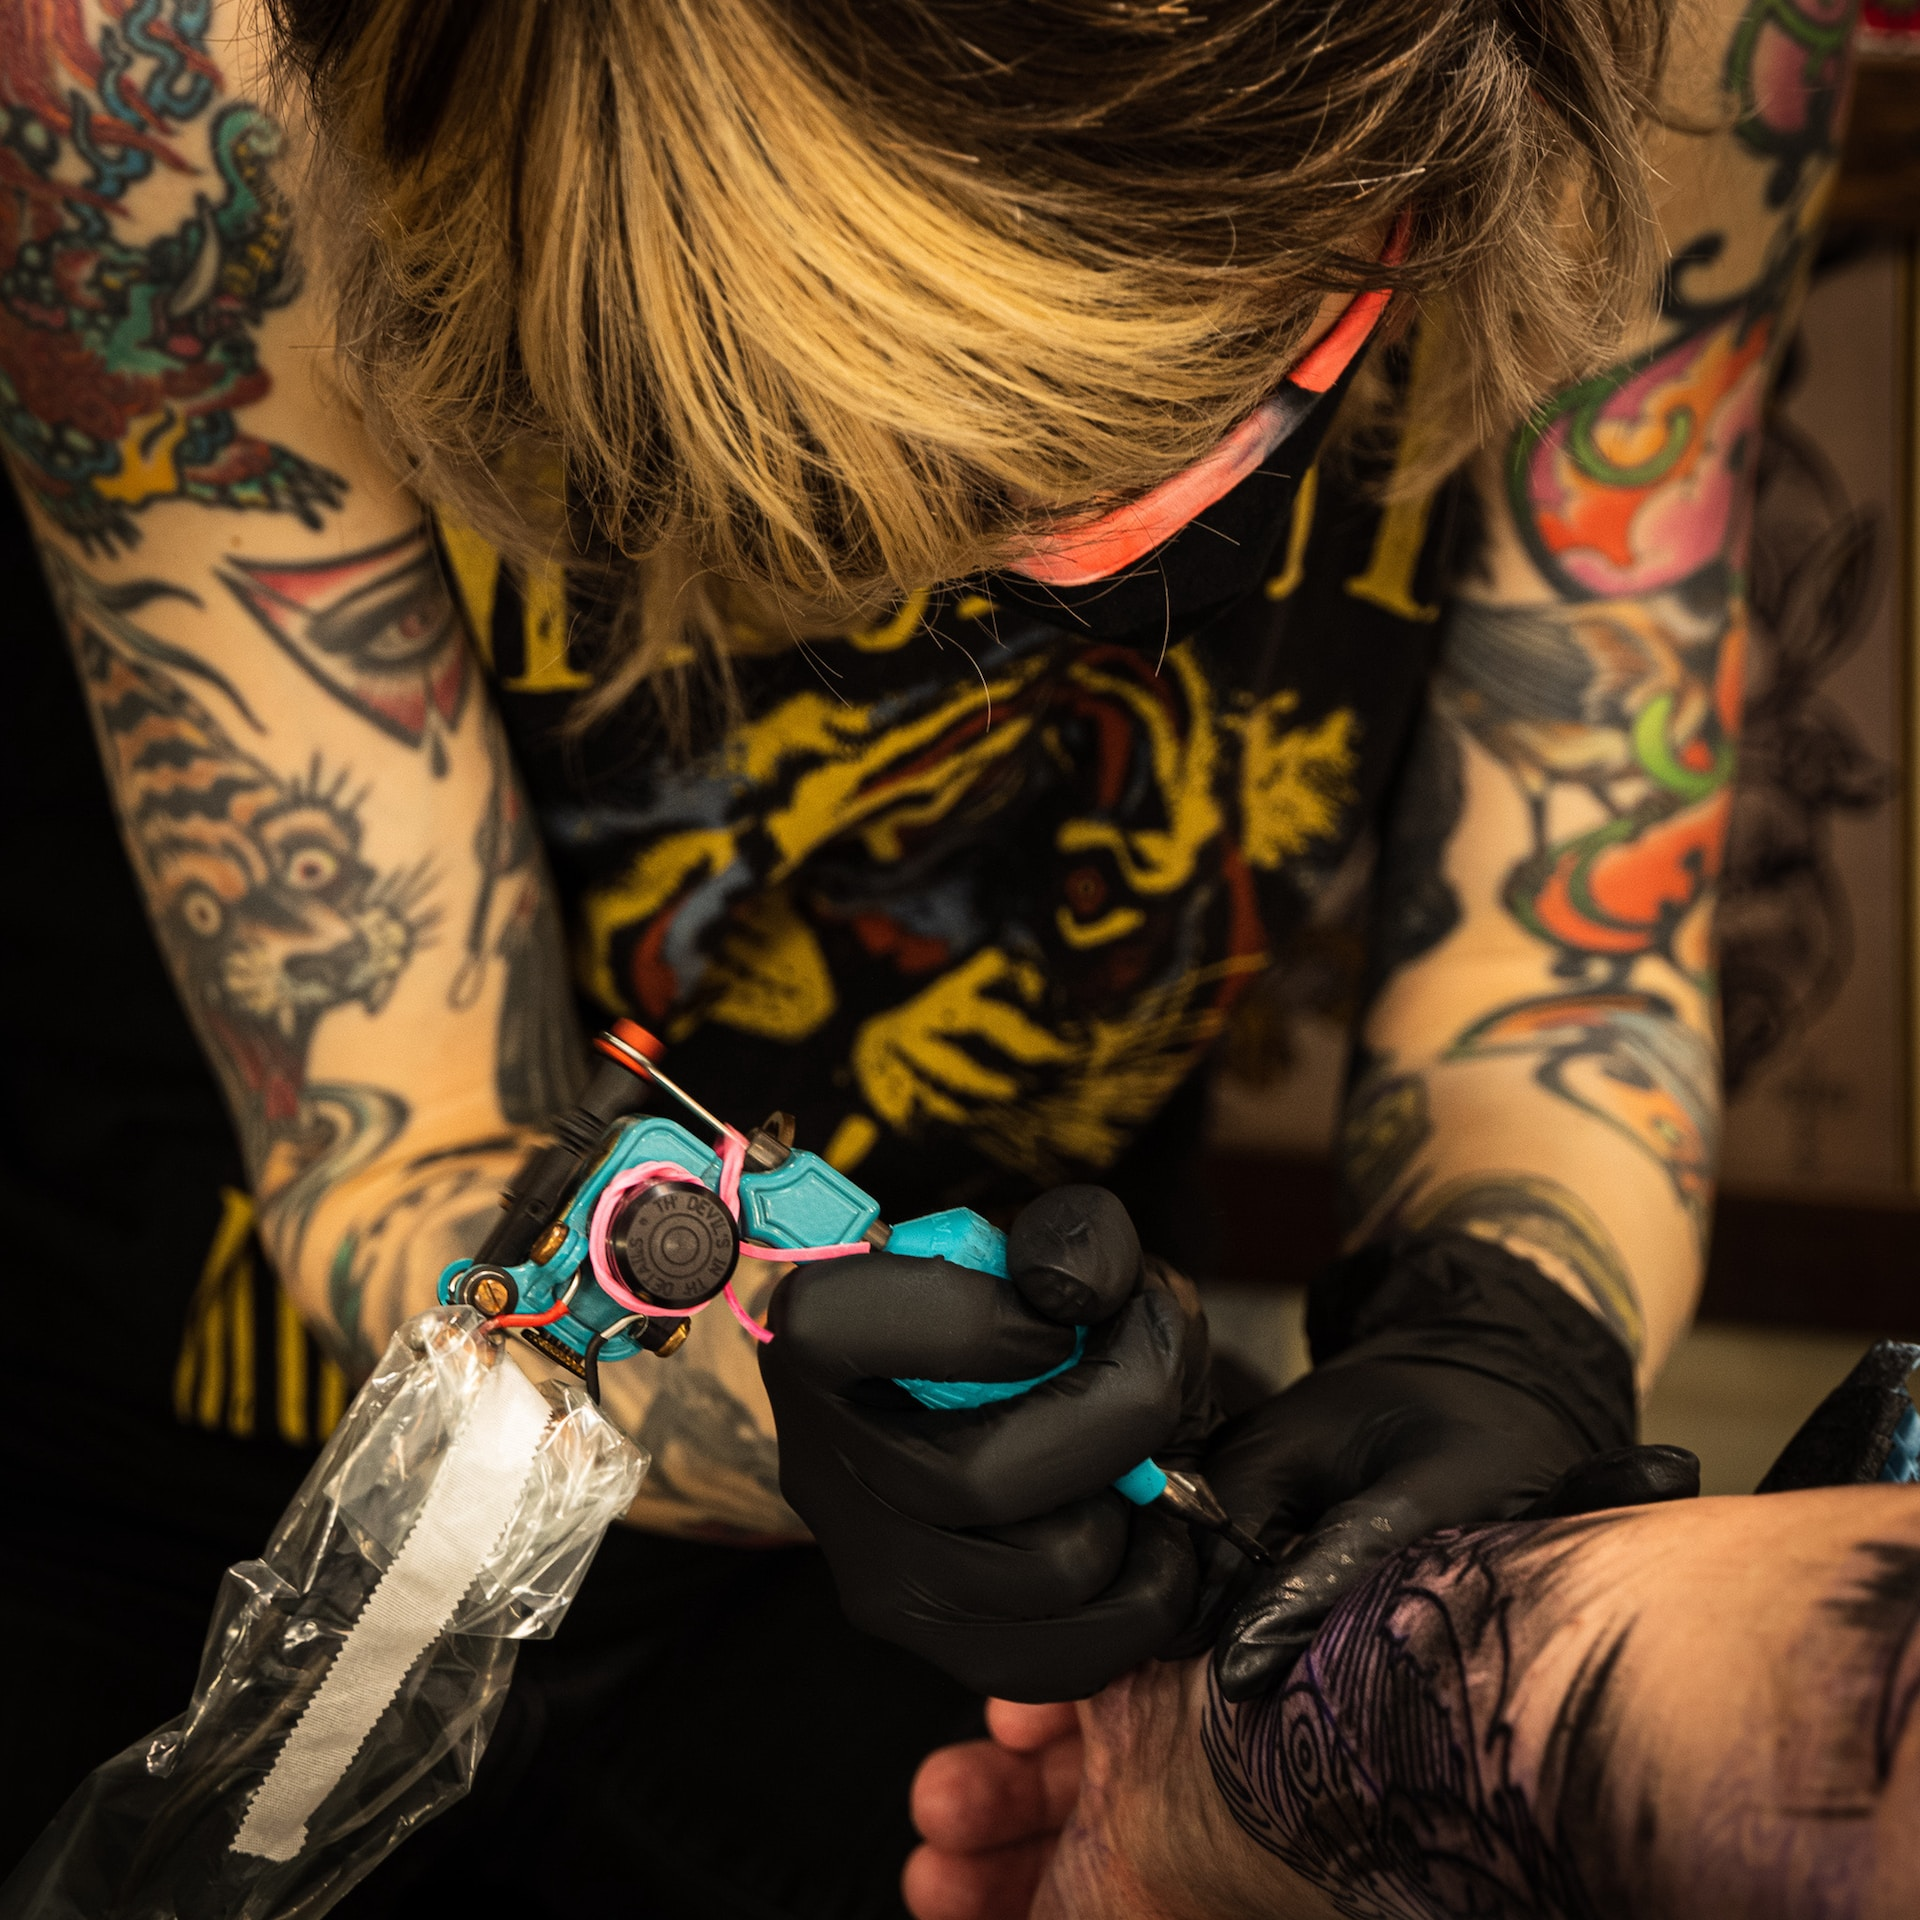 An Experienced Artist working on a New Tattoo